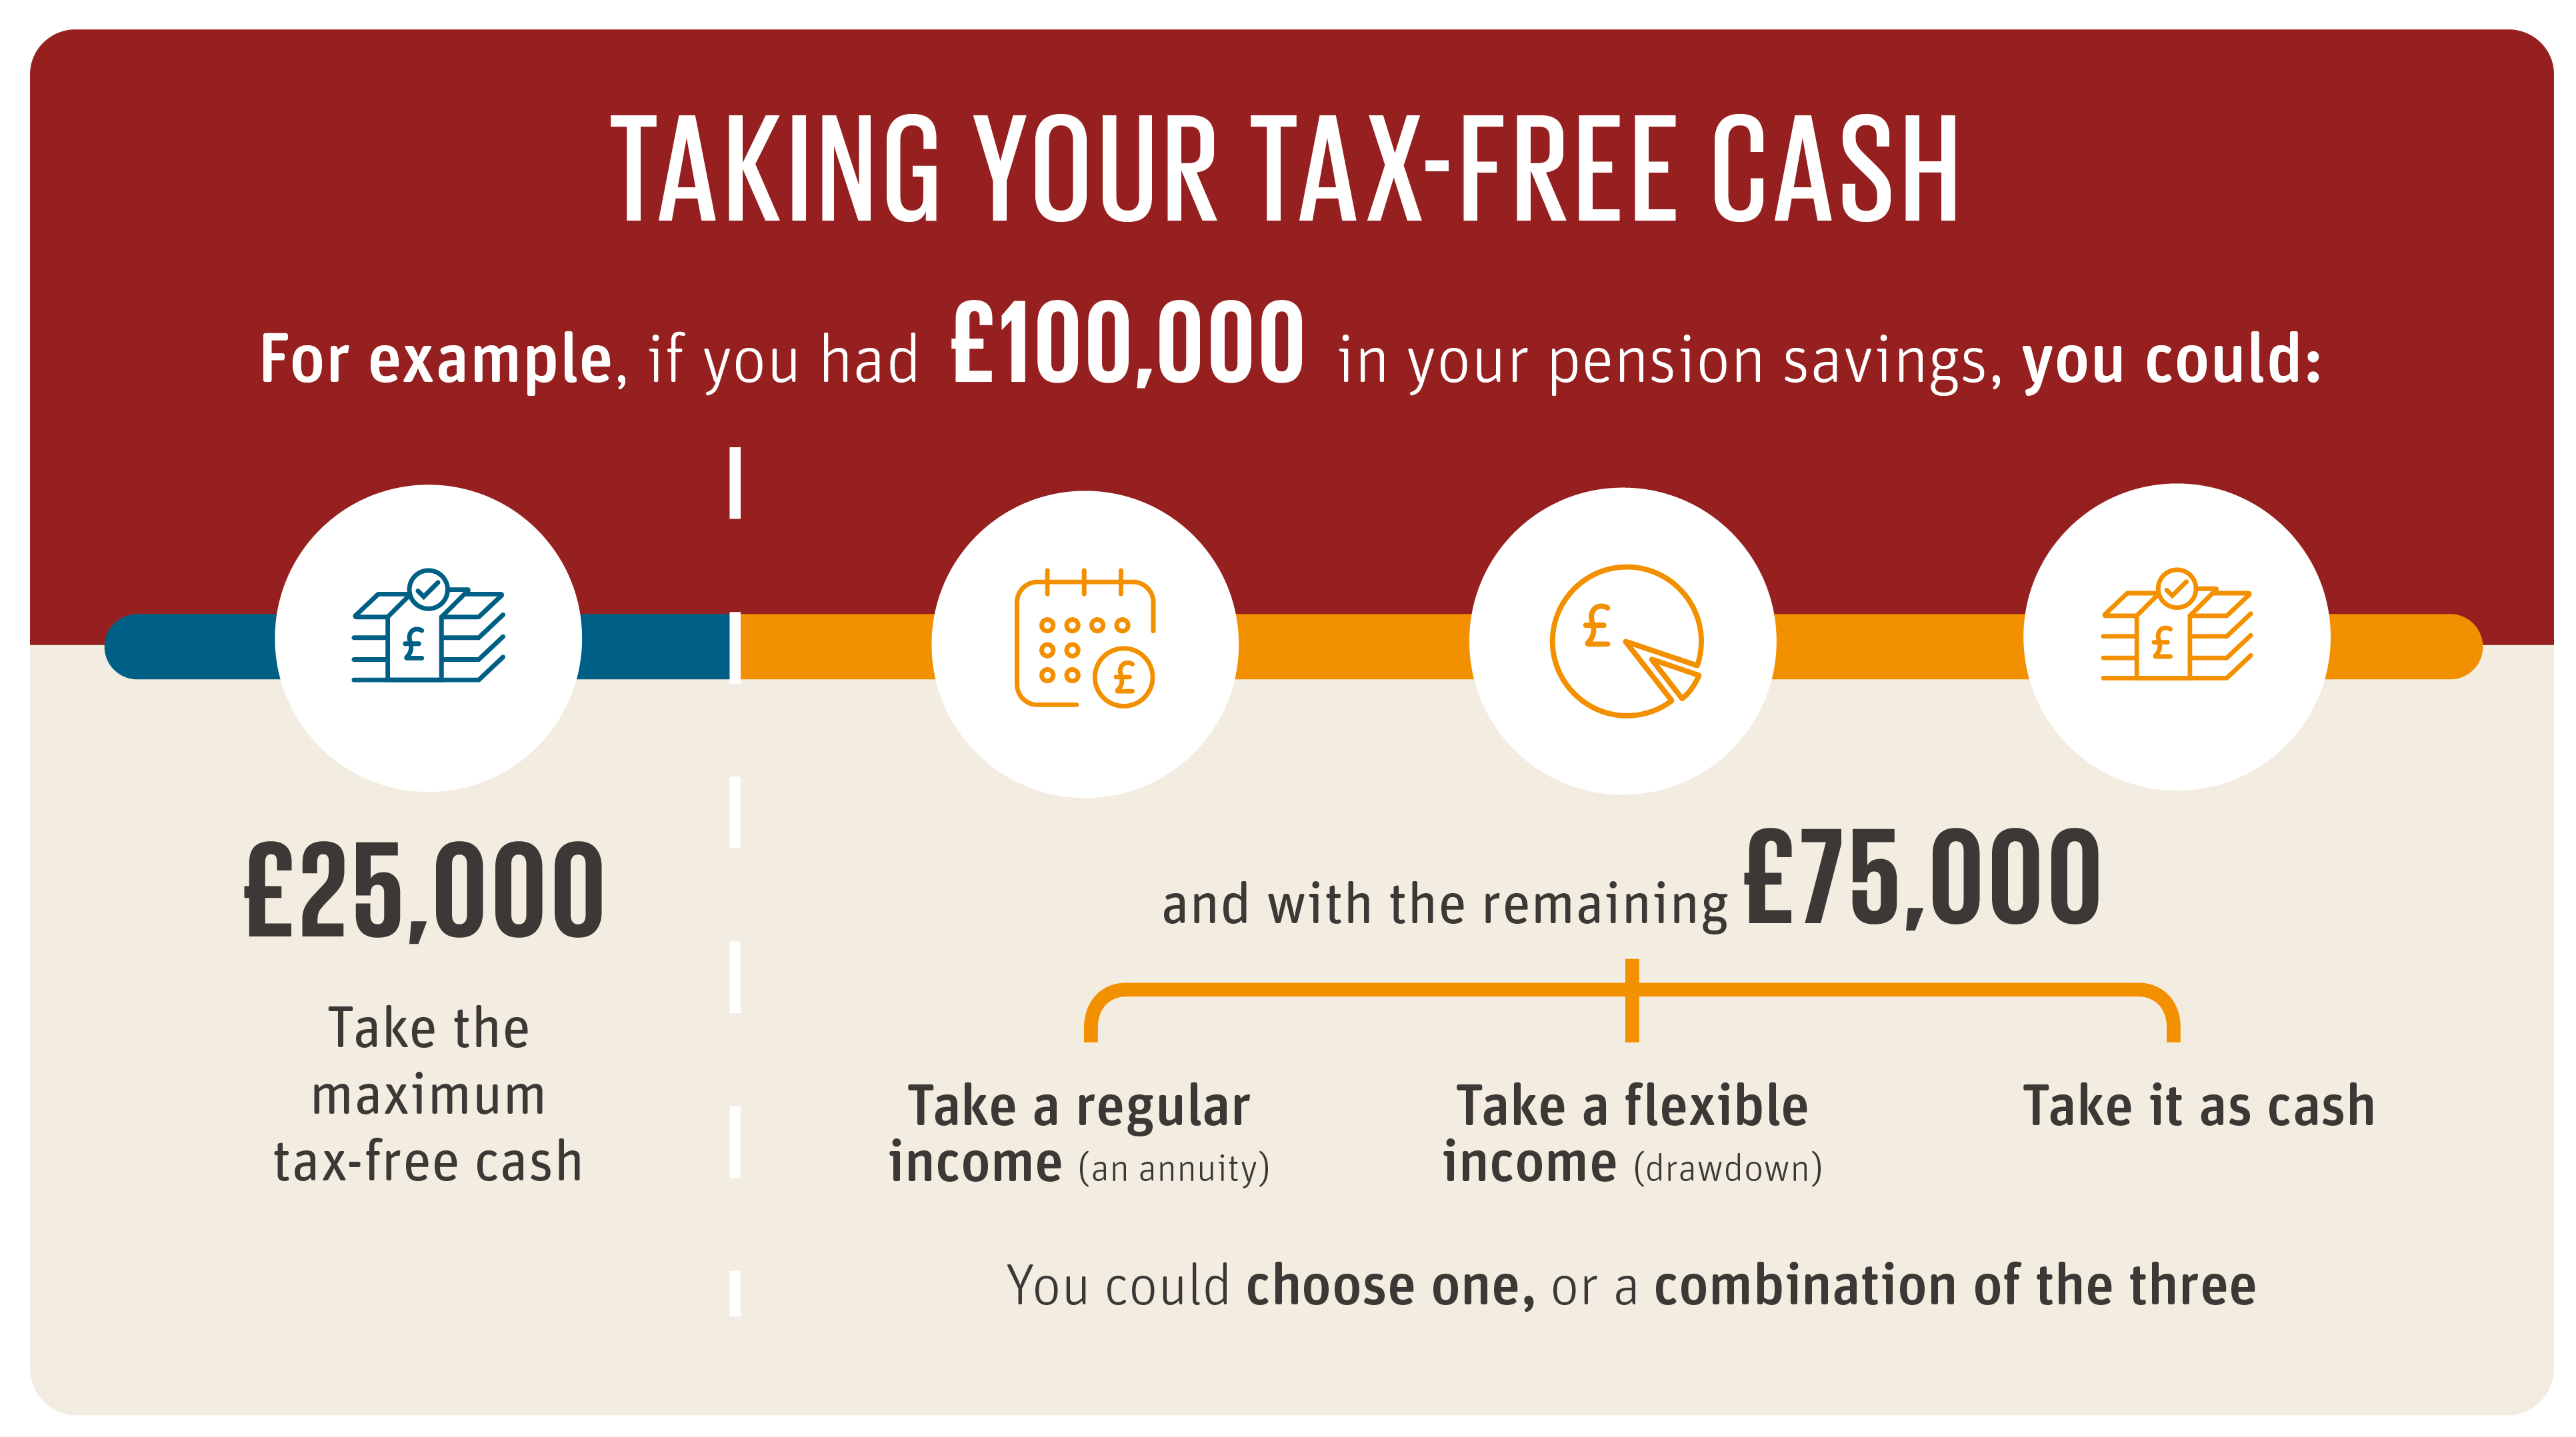 Explanation of options after taking tax free cash